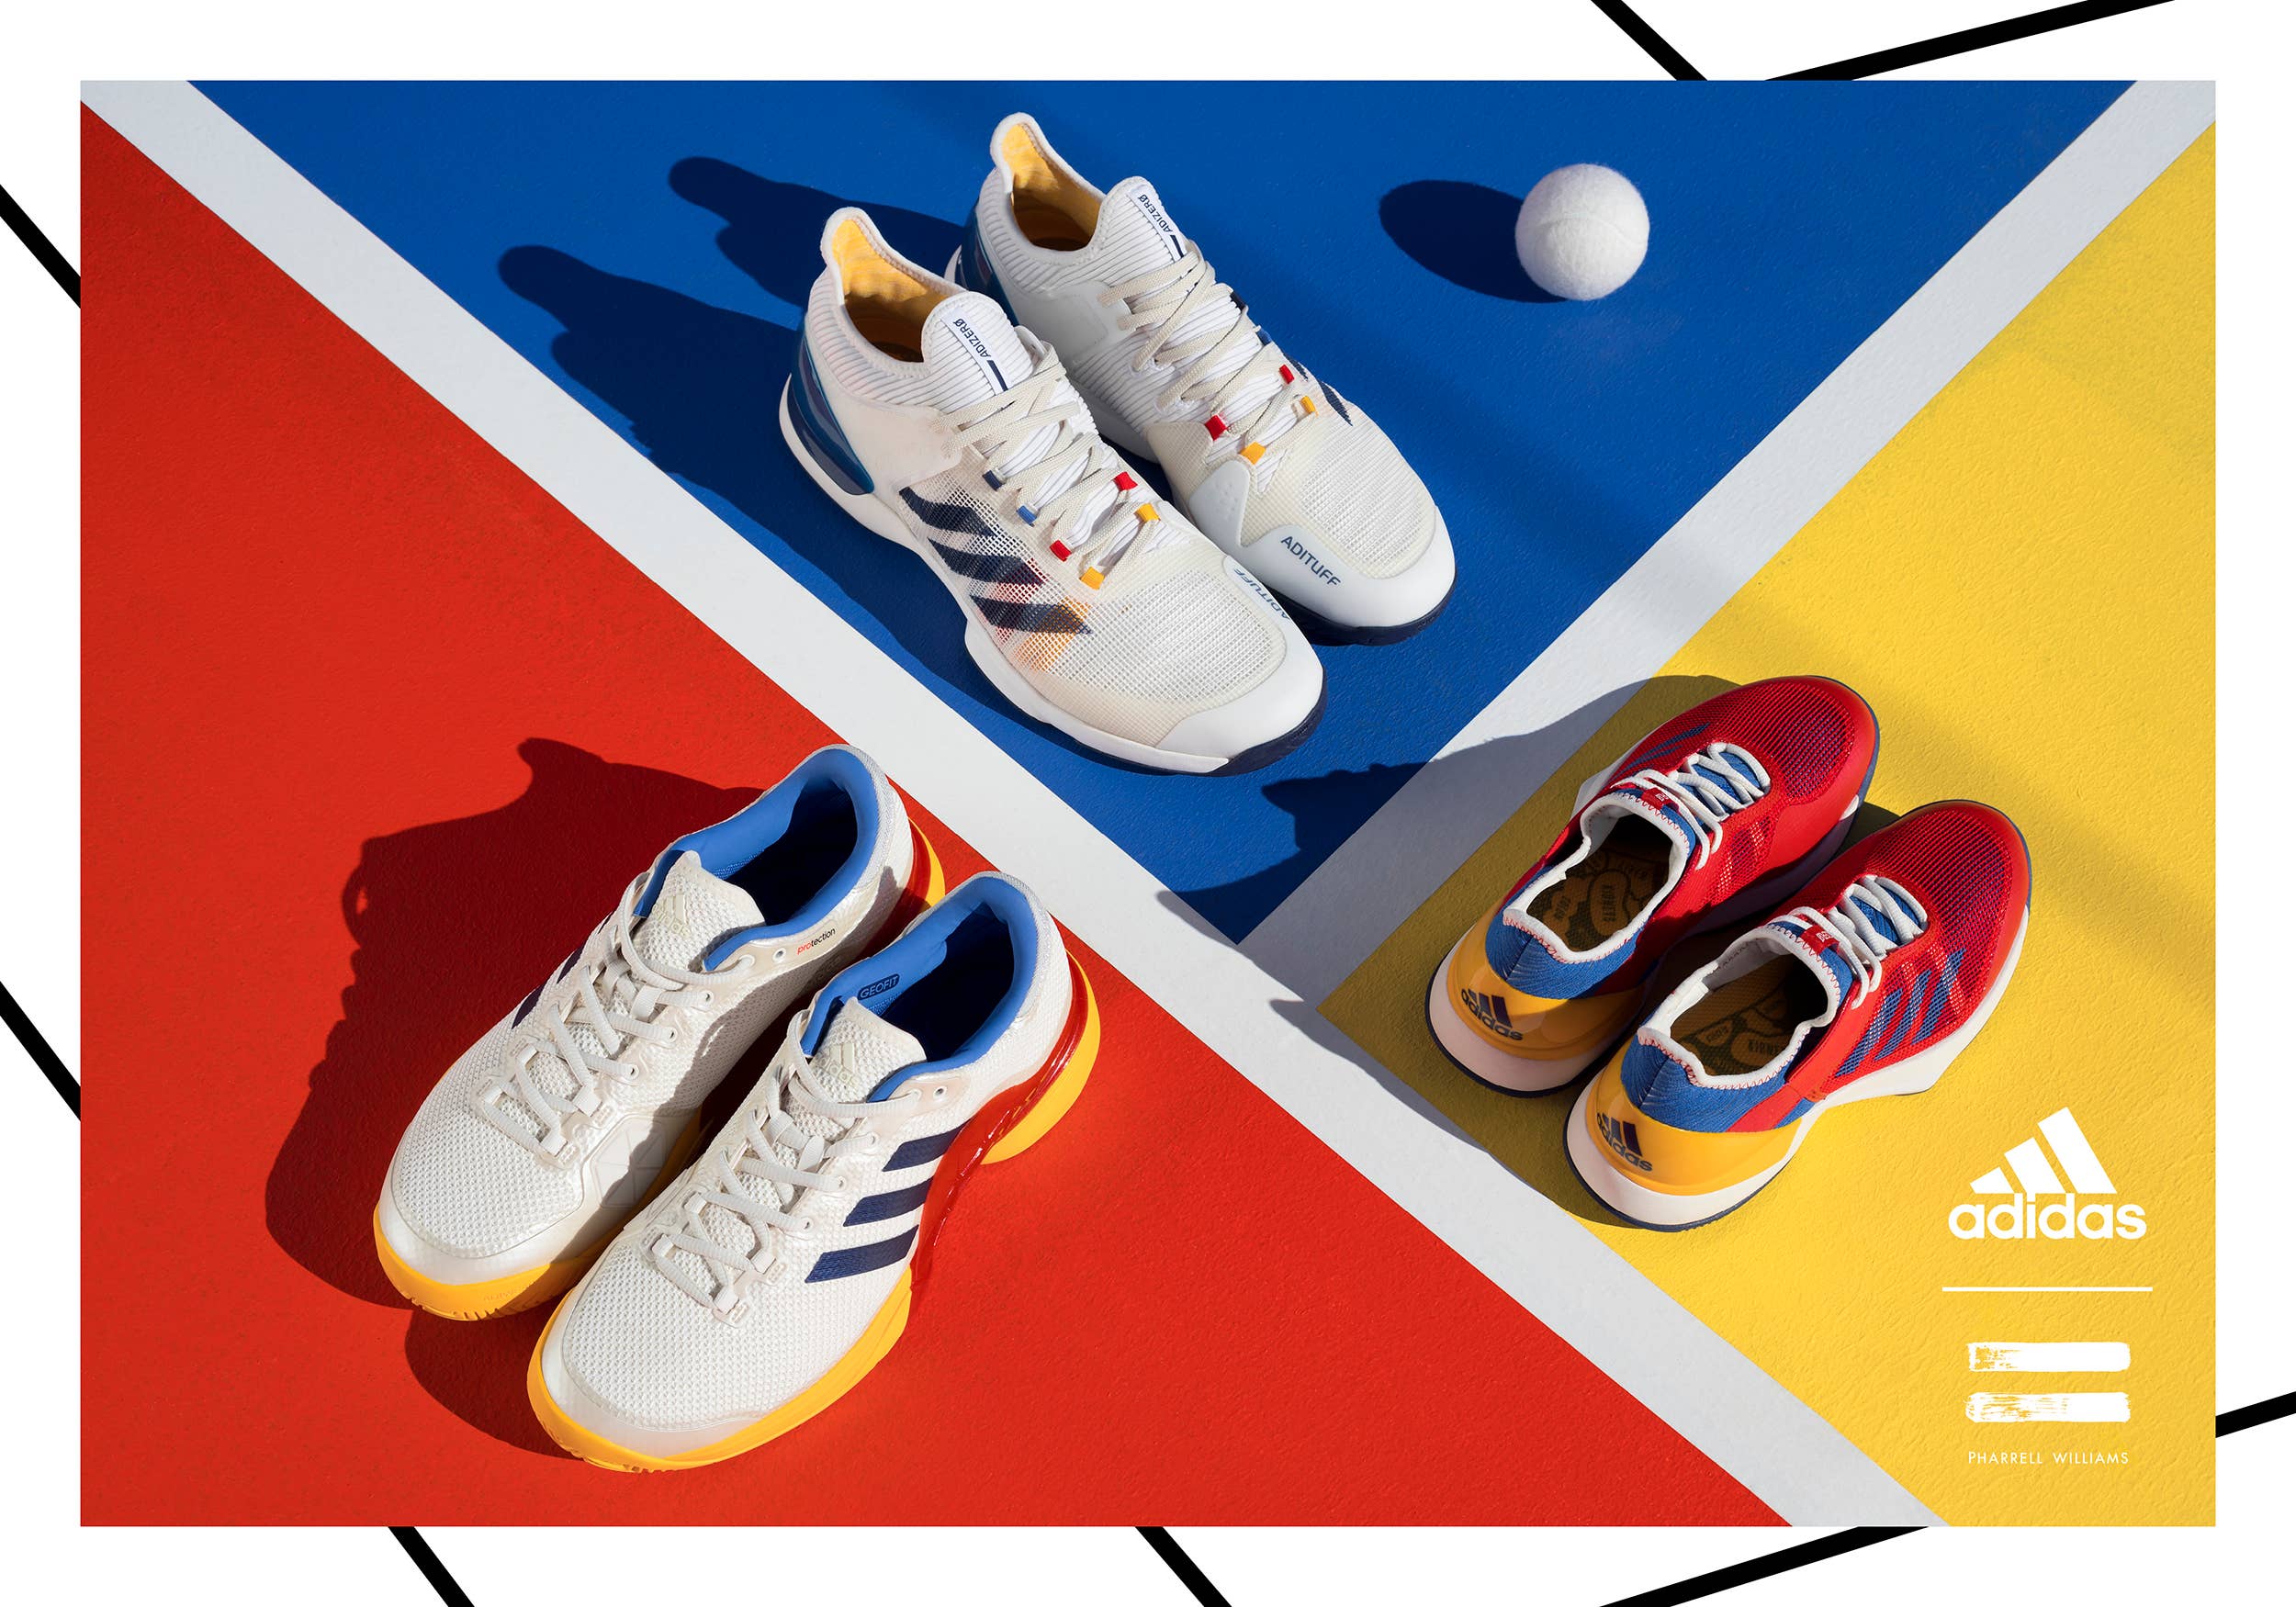 Adidas Tennis Collection by Pharrell Williams Footwear